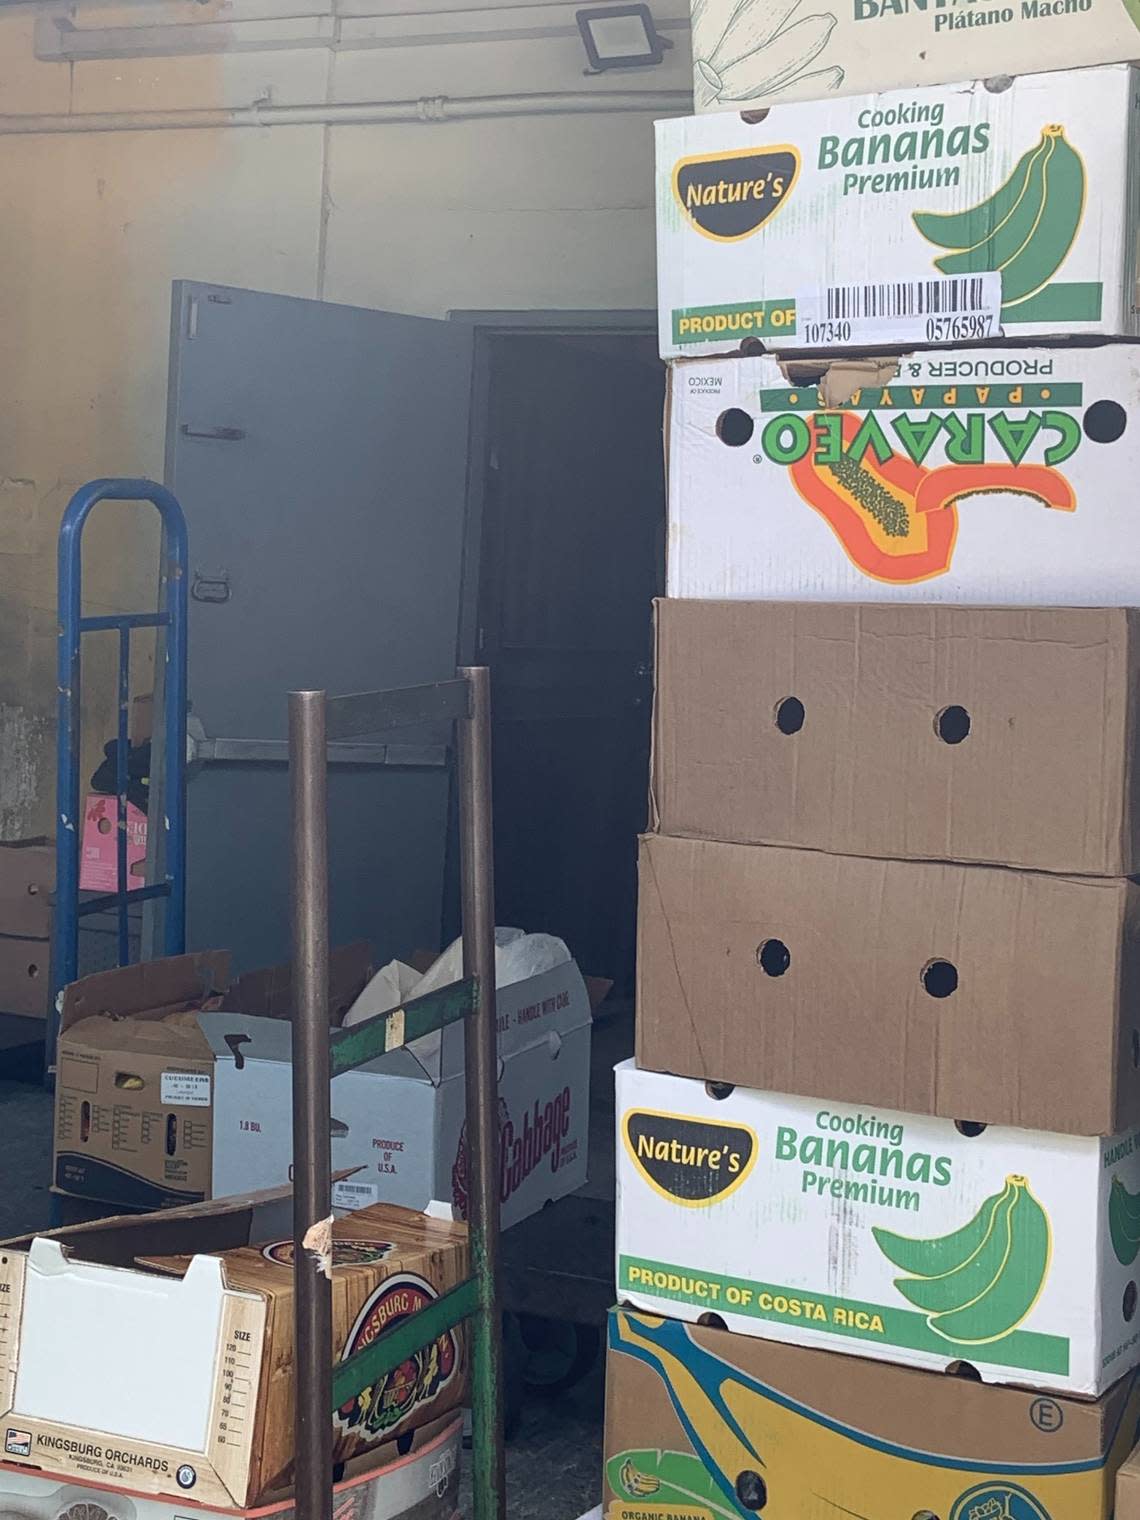 The inspection of a Price Choice Foodmarket, 1900 W. 60th St. in Hialeah, by Wenndy Ayerdis and Francis Odio says, the “door leading to the outdoor storage area was open during the entire inspection with no protection against the entry of insects and rodents.”